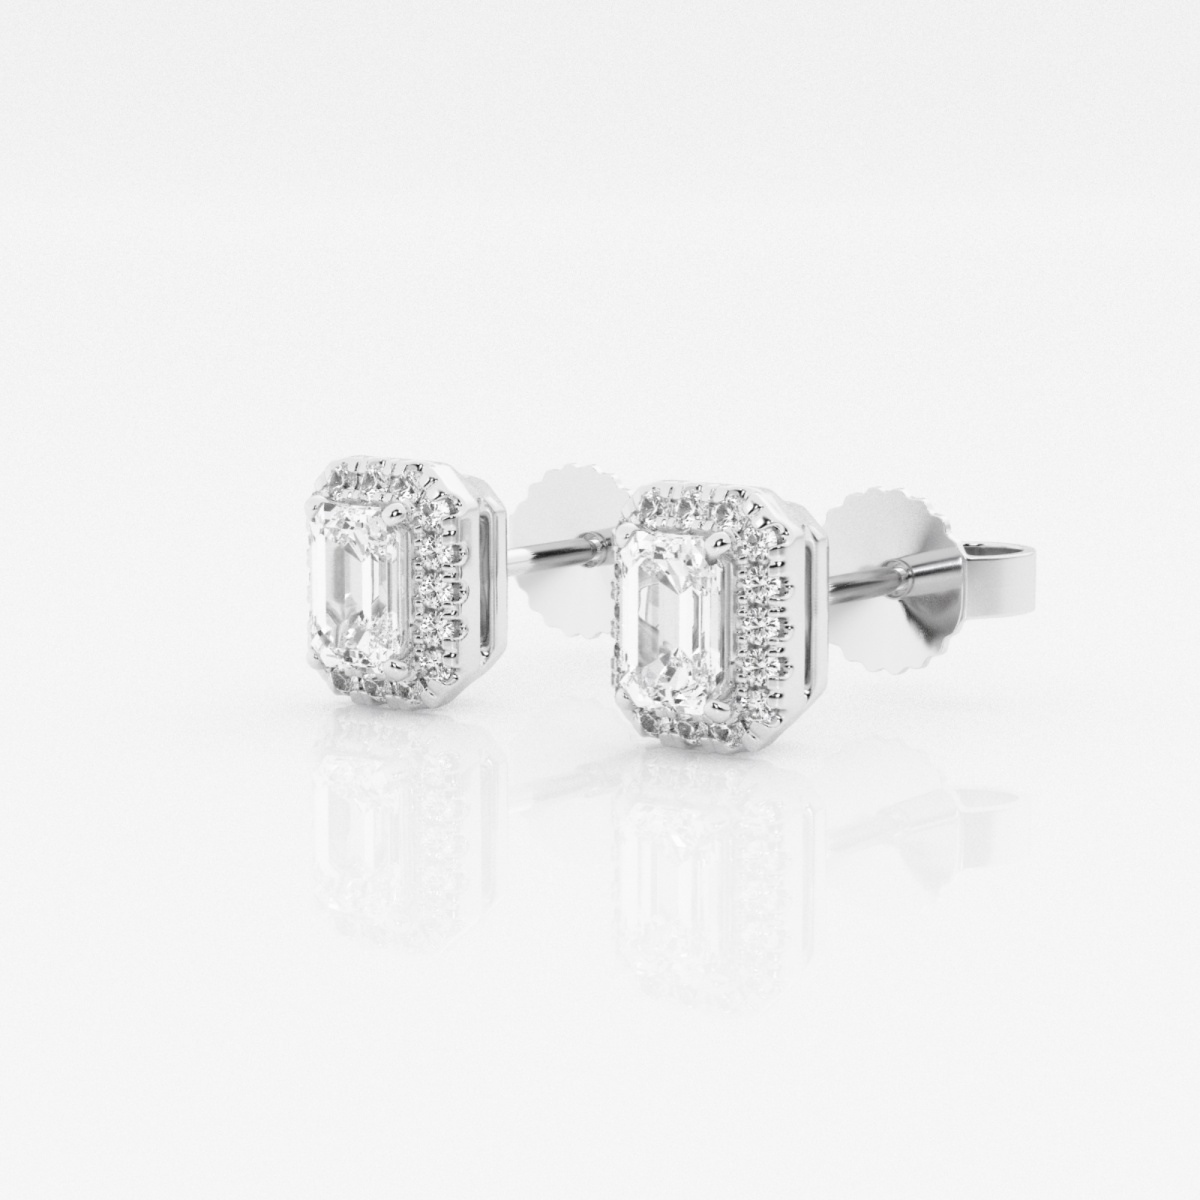 Additional Image 1 for  5/8 ctw Emerald Lab Grown Diamond Halo Stud Earrings